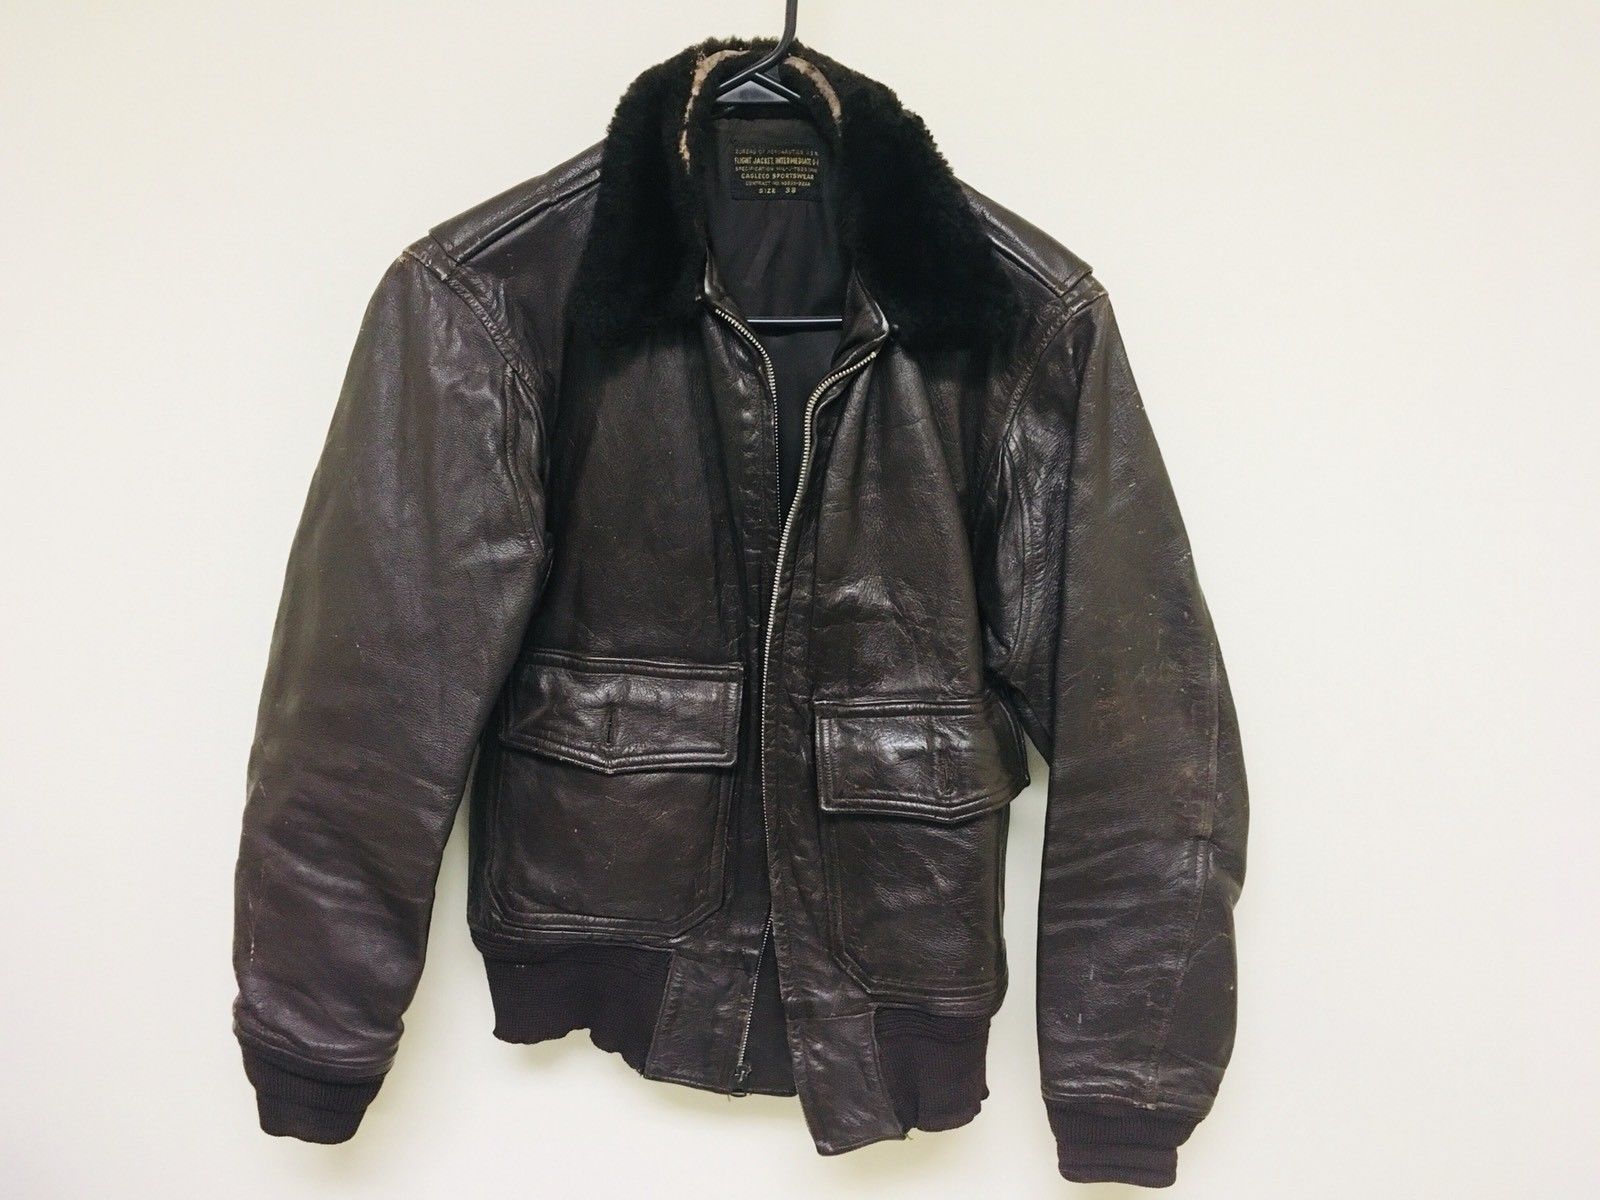 G-1 CAGLECO 9211A contract | Vintage Leather Jackets Forum